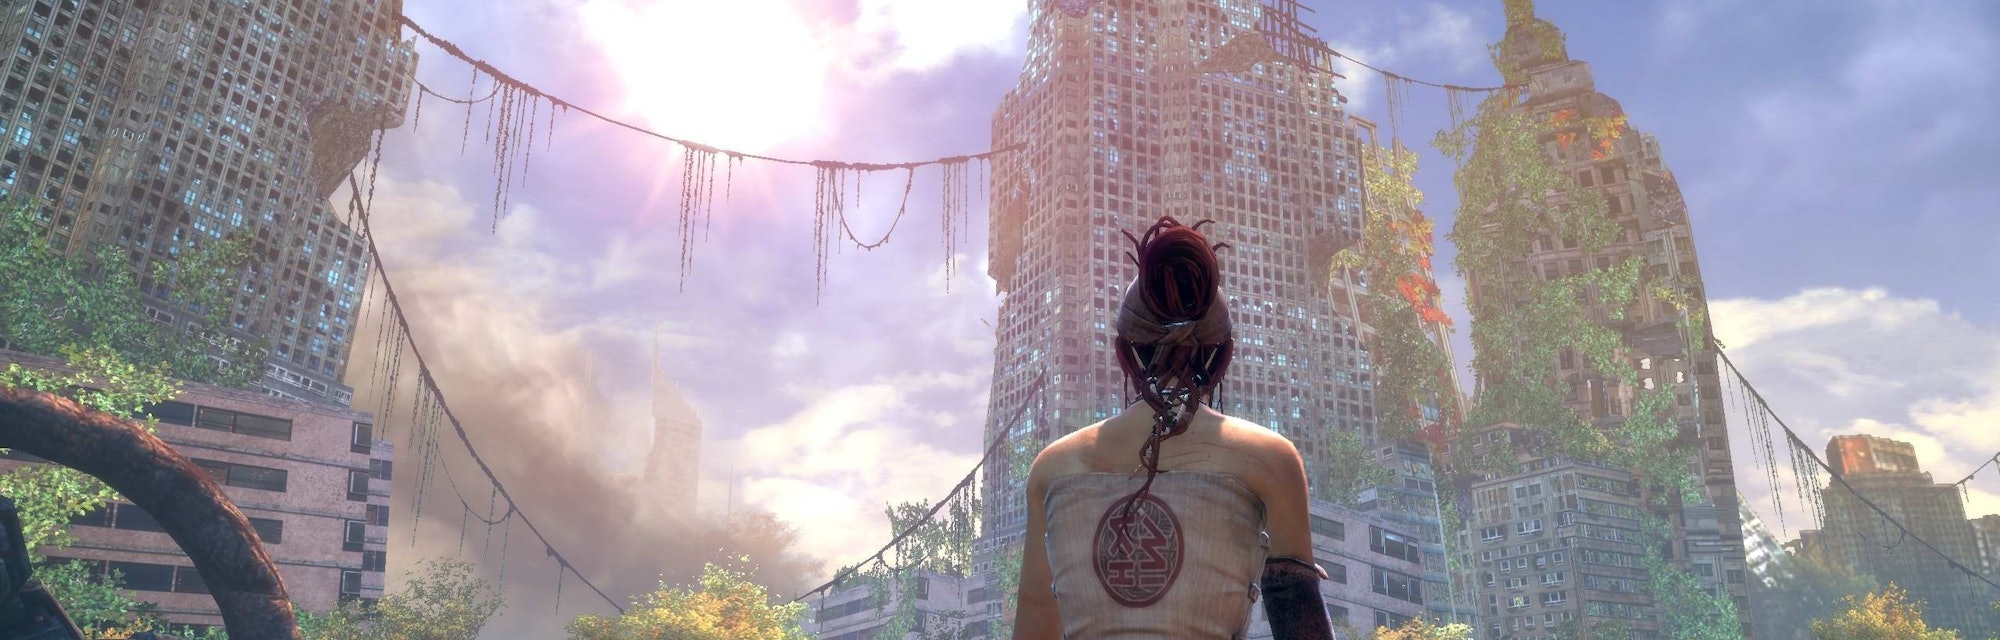 Enslaved: Odyssey to the West may be the most influential game of the past decade.